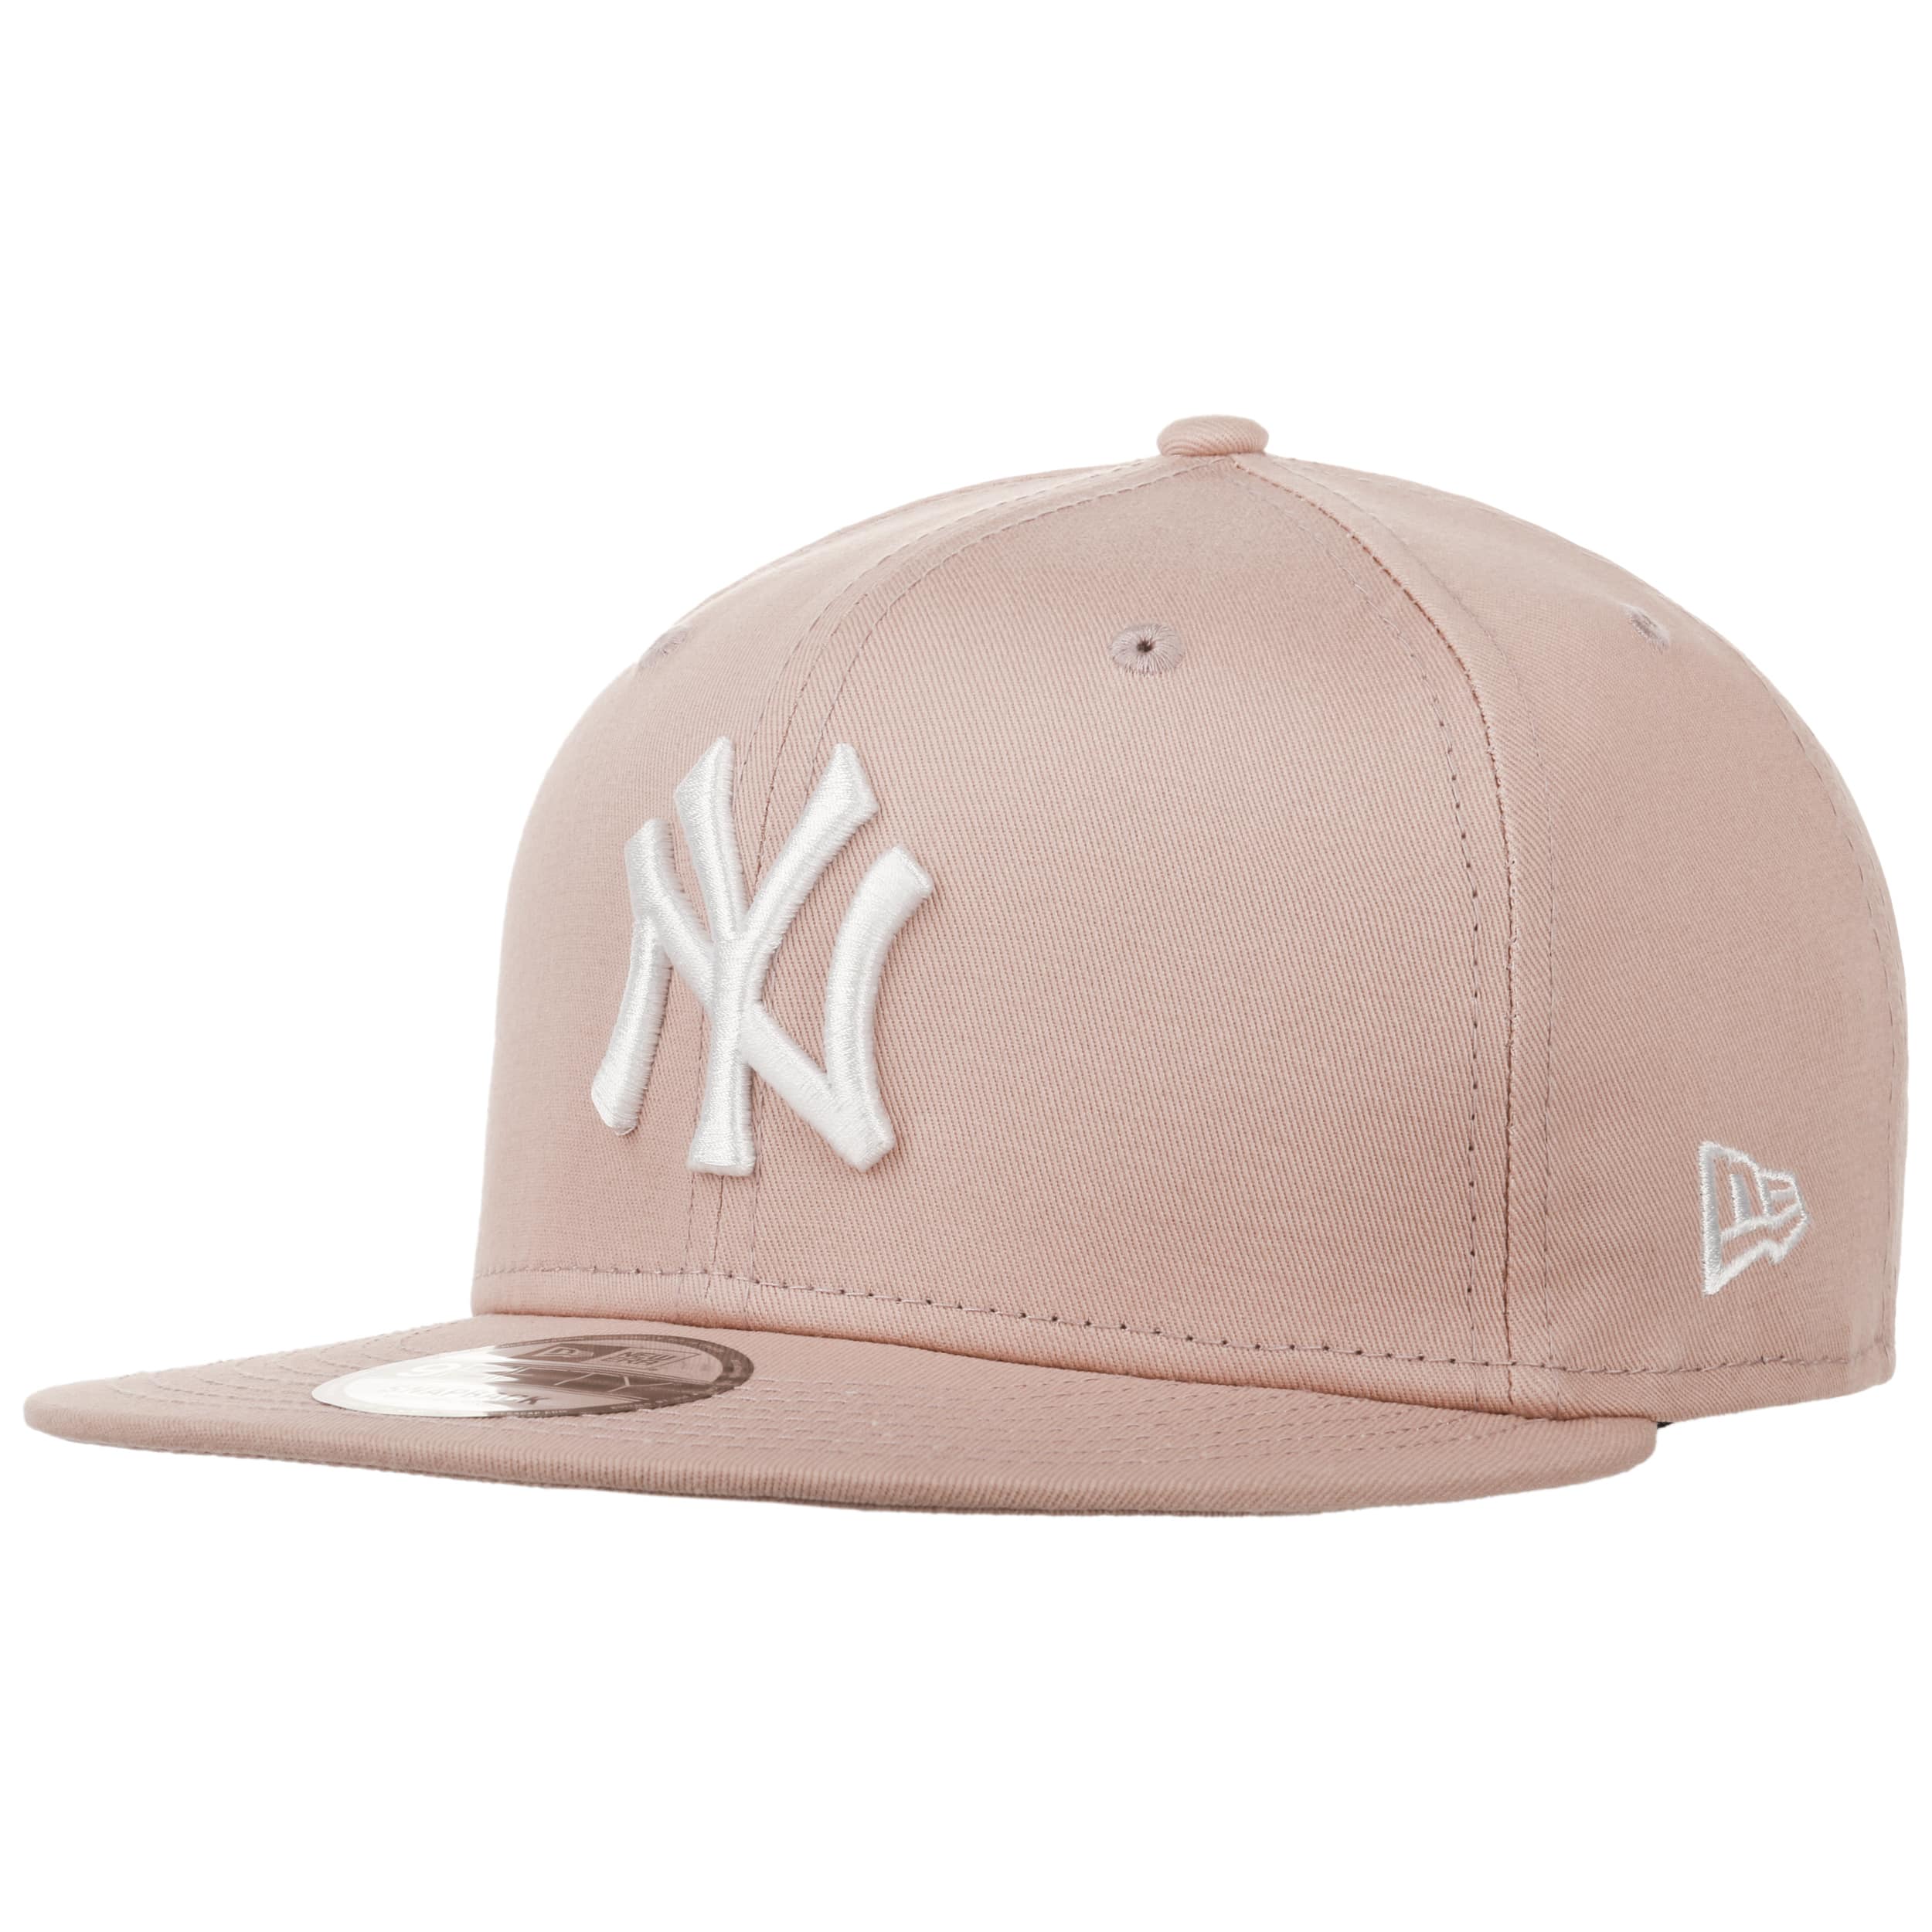 League Cap New Era 40,95 Essential € by 9Fifty - Yankees